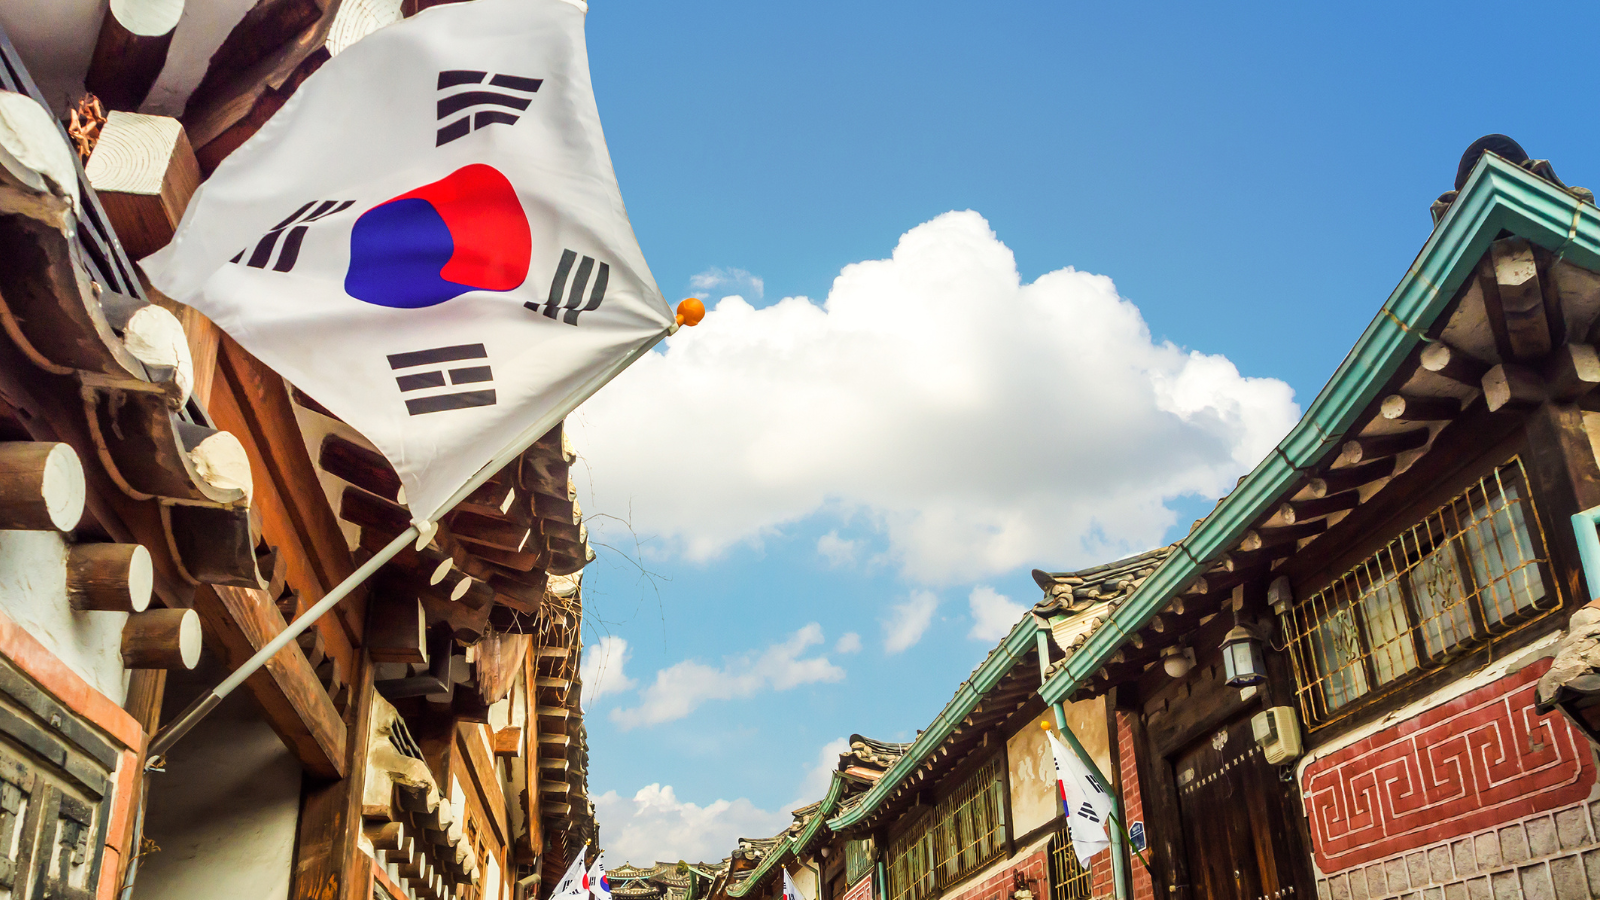 <p>South Korea offers programs for English teachers with financial aid and visa assistance to attract young foreigners and boost its demographic balance. This can be a great way to experience Korean culture while earning a living. Many programs require a TEFL (Teaching English as a Foreign Language) certification and specific eligibility requirements.</p>